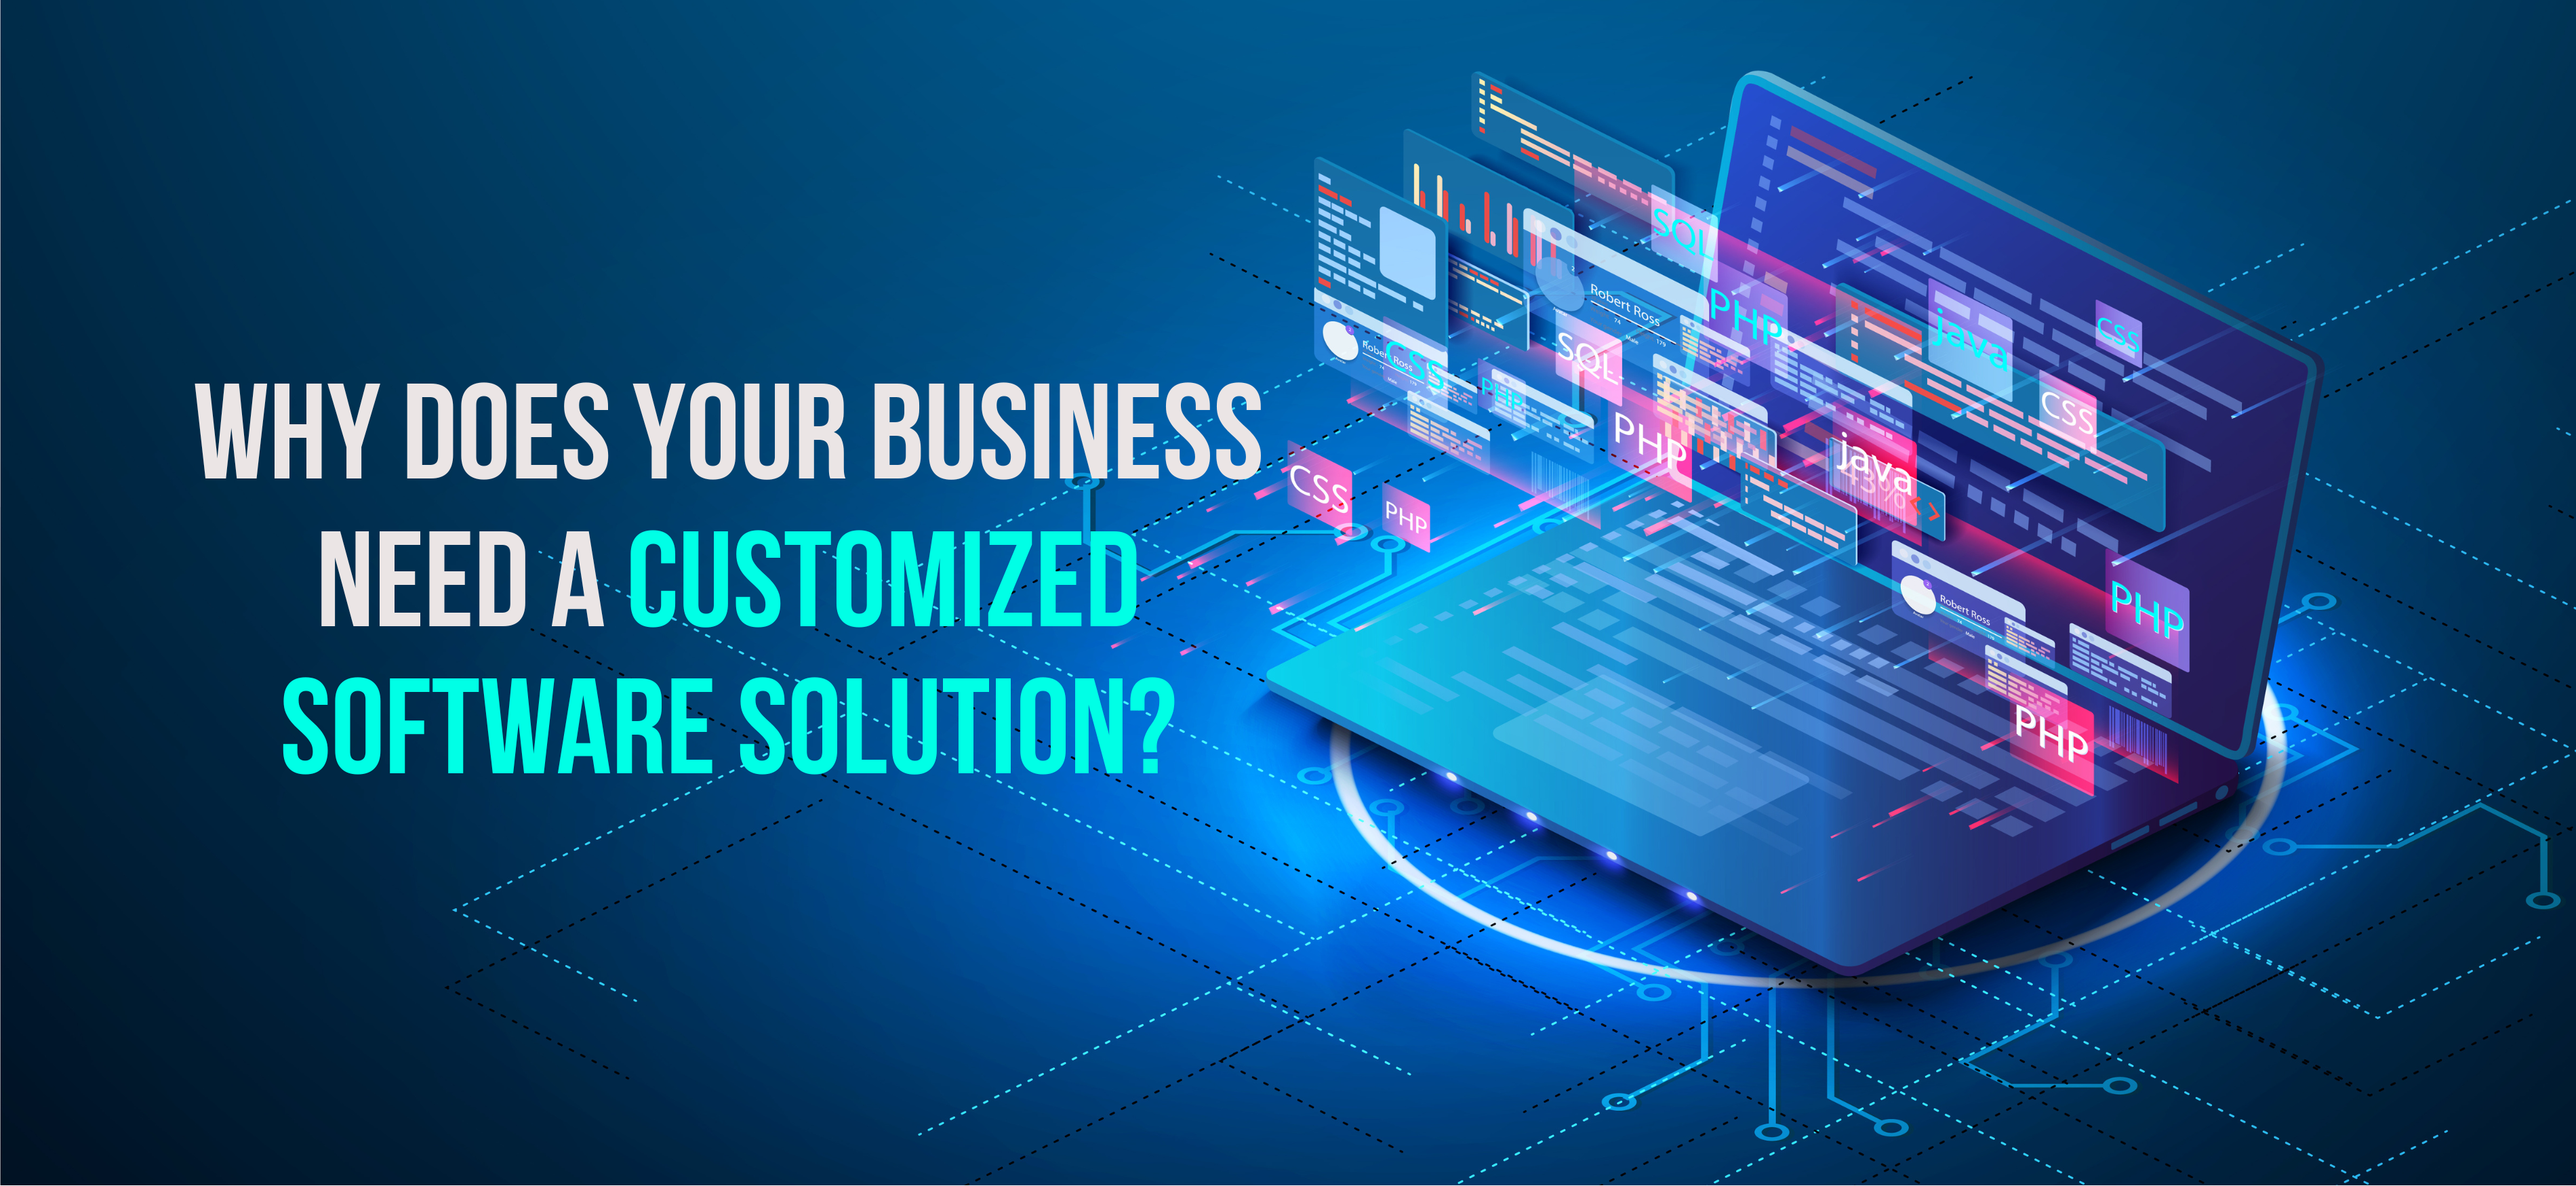 Why Does your Business Need a Customized Software Solution - Internet Soft